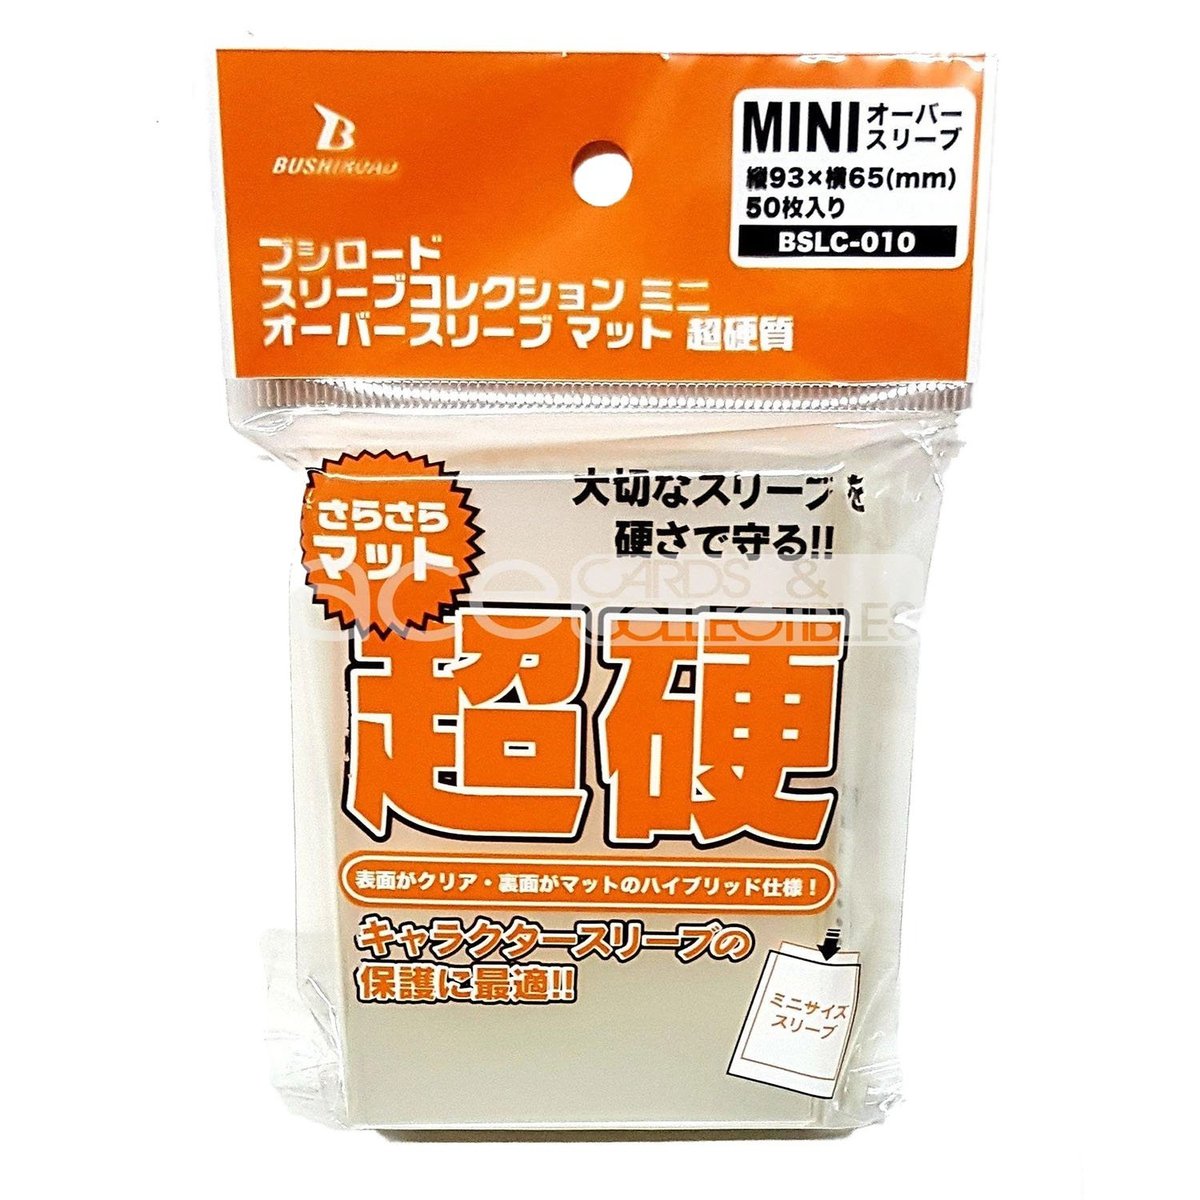 Bushiroad Sleeve Protector "Mat & Clear" Over Sleeve for Mini Size (Super Hard) [BSLC-010]-Bushiroad-Ace Cards & Collectibles